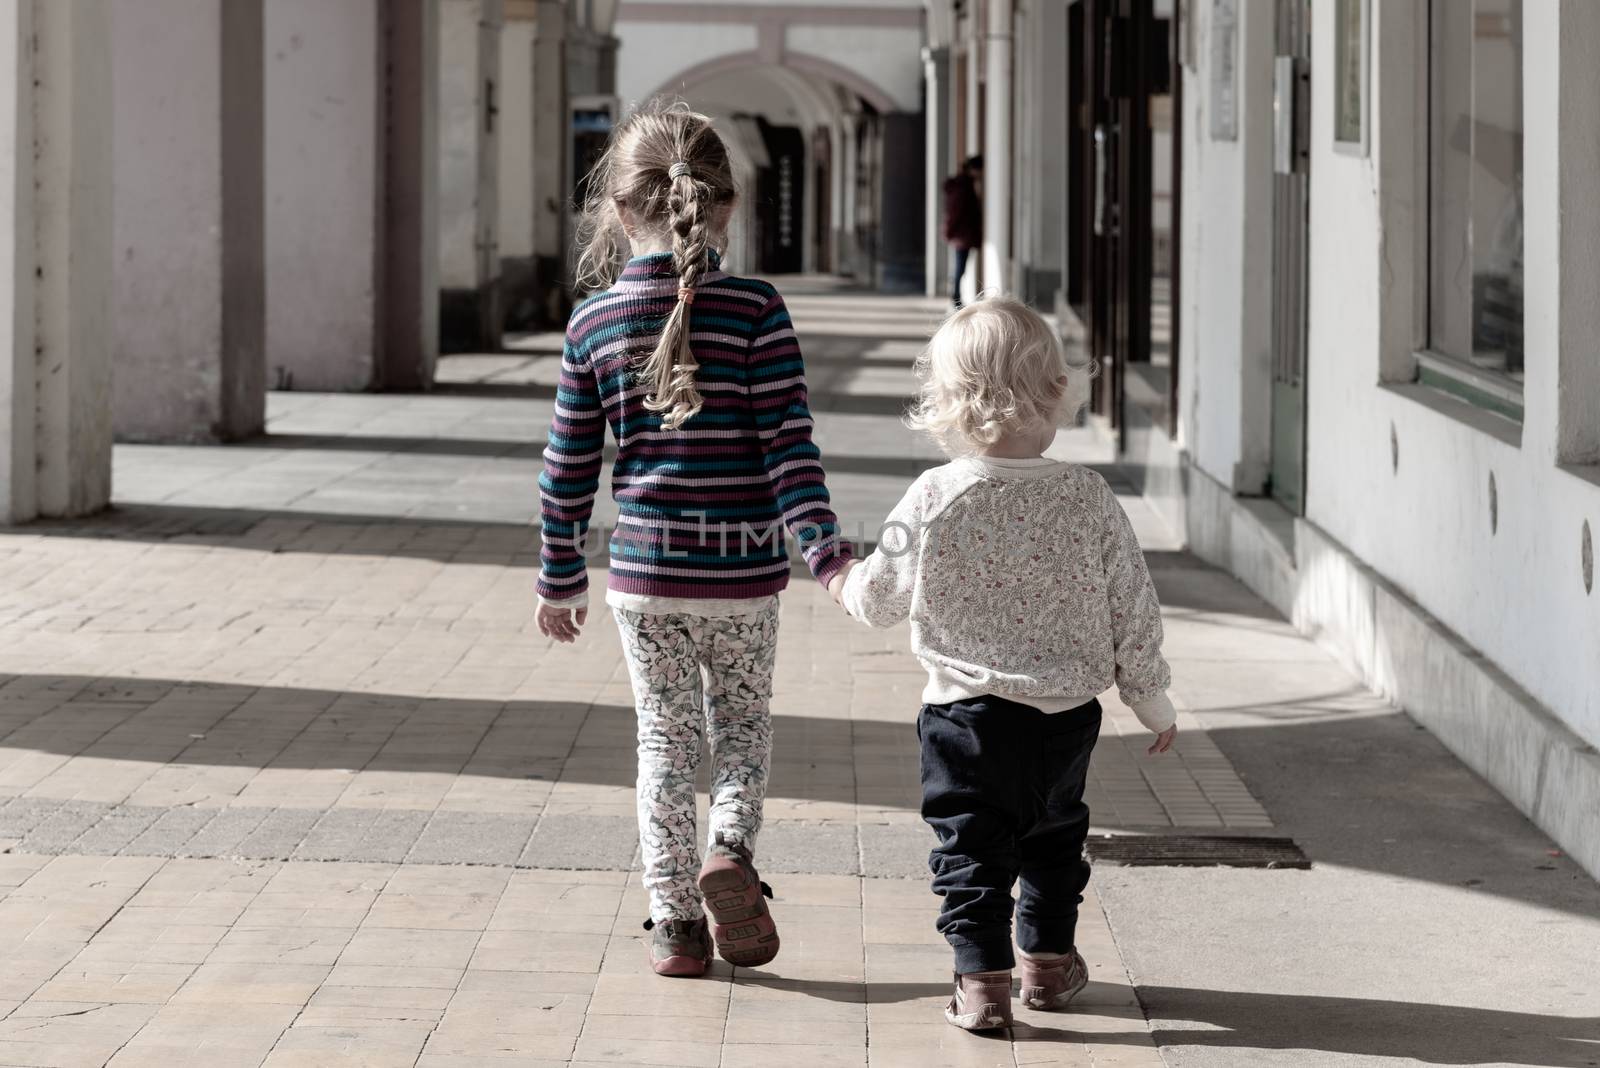 Two young children walk together hand in hand in the old town arcade street. Family love and friendship theme by pyty